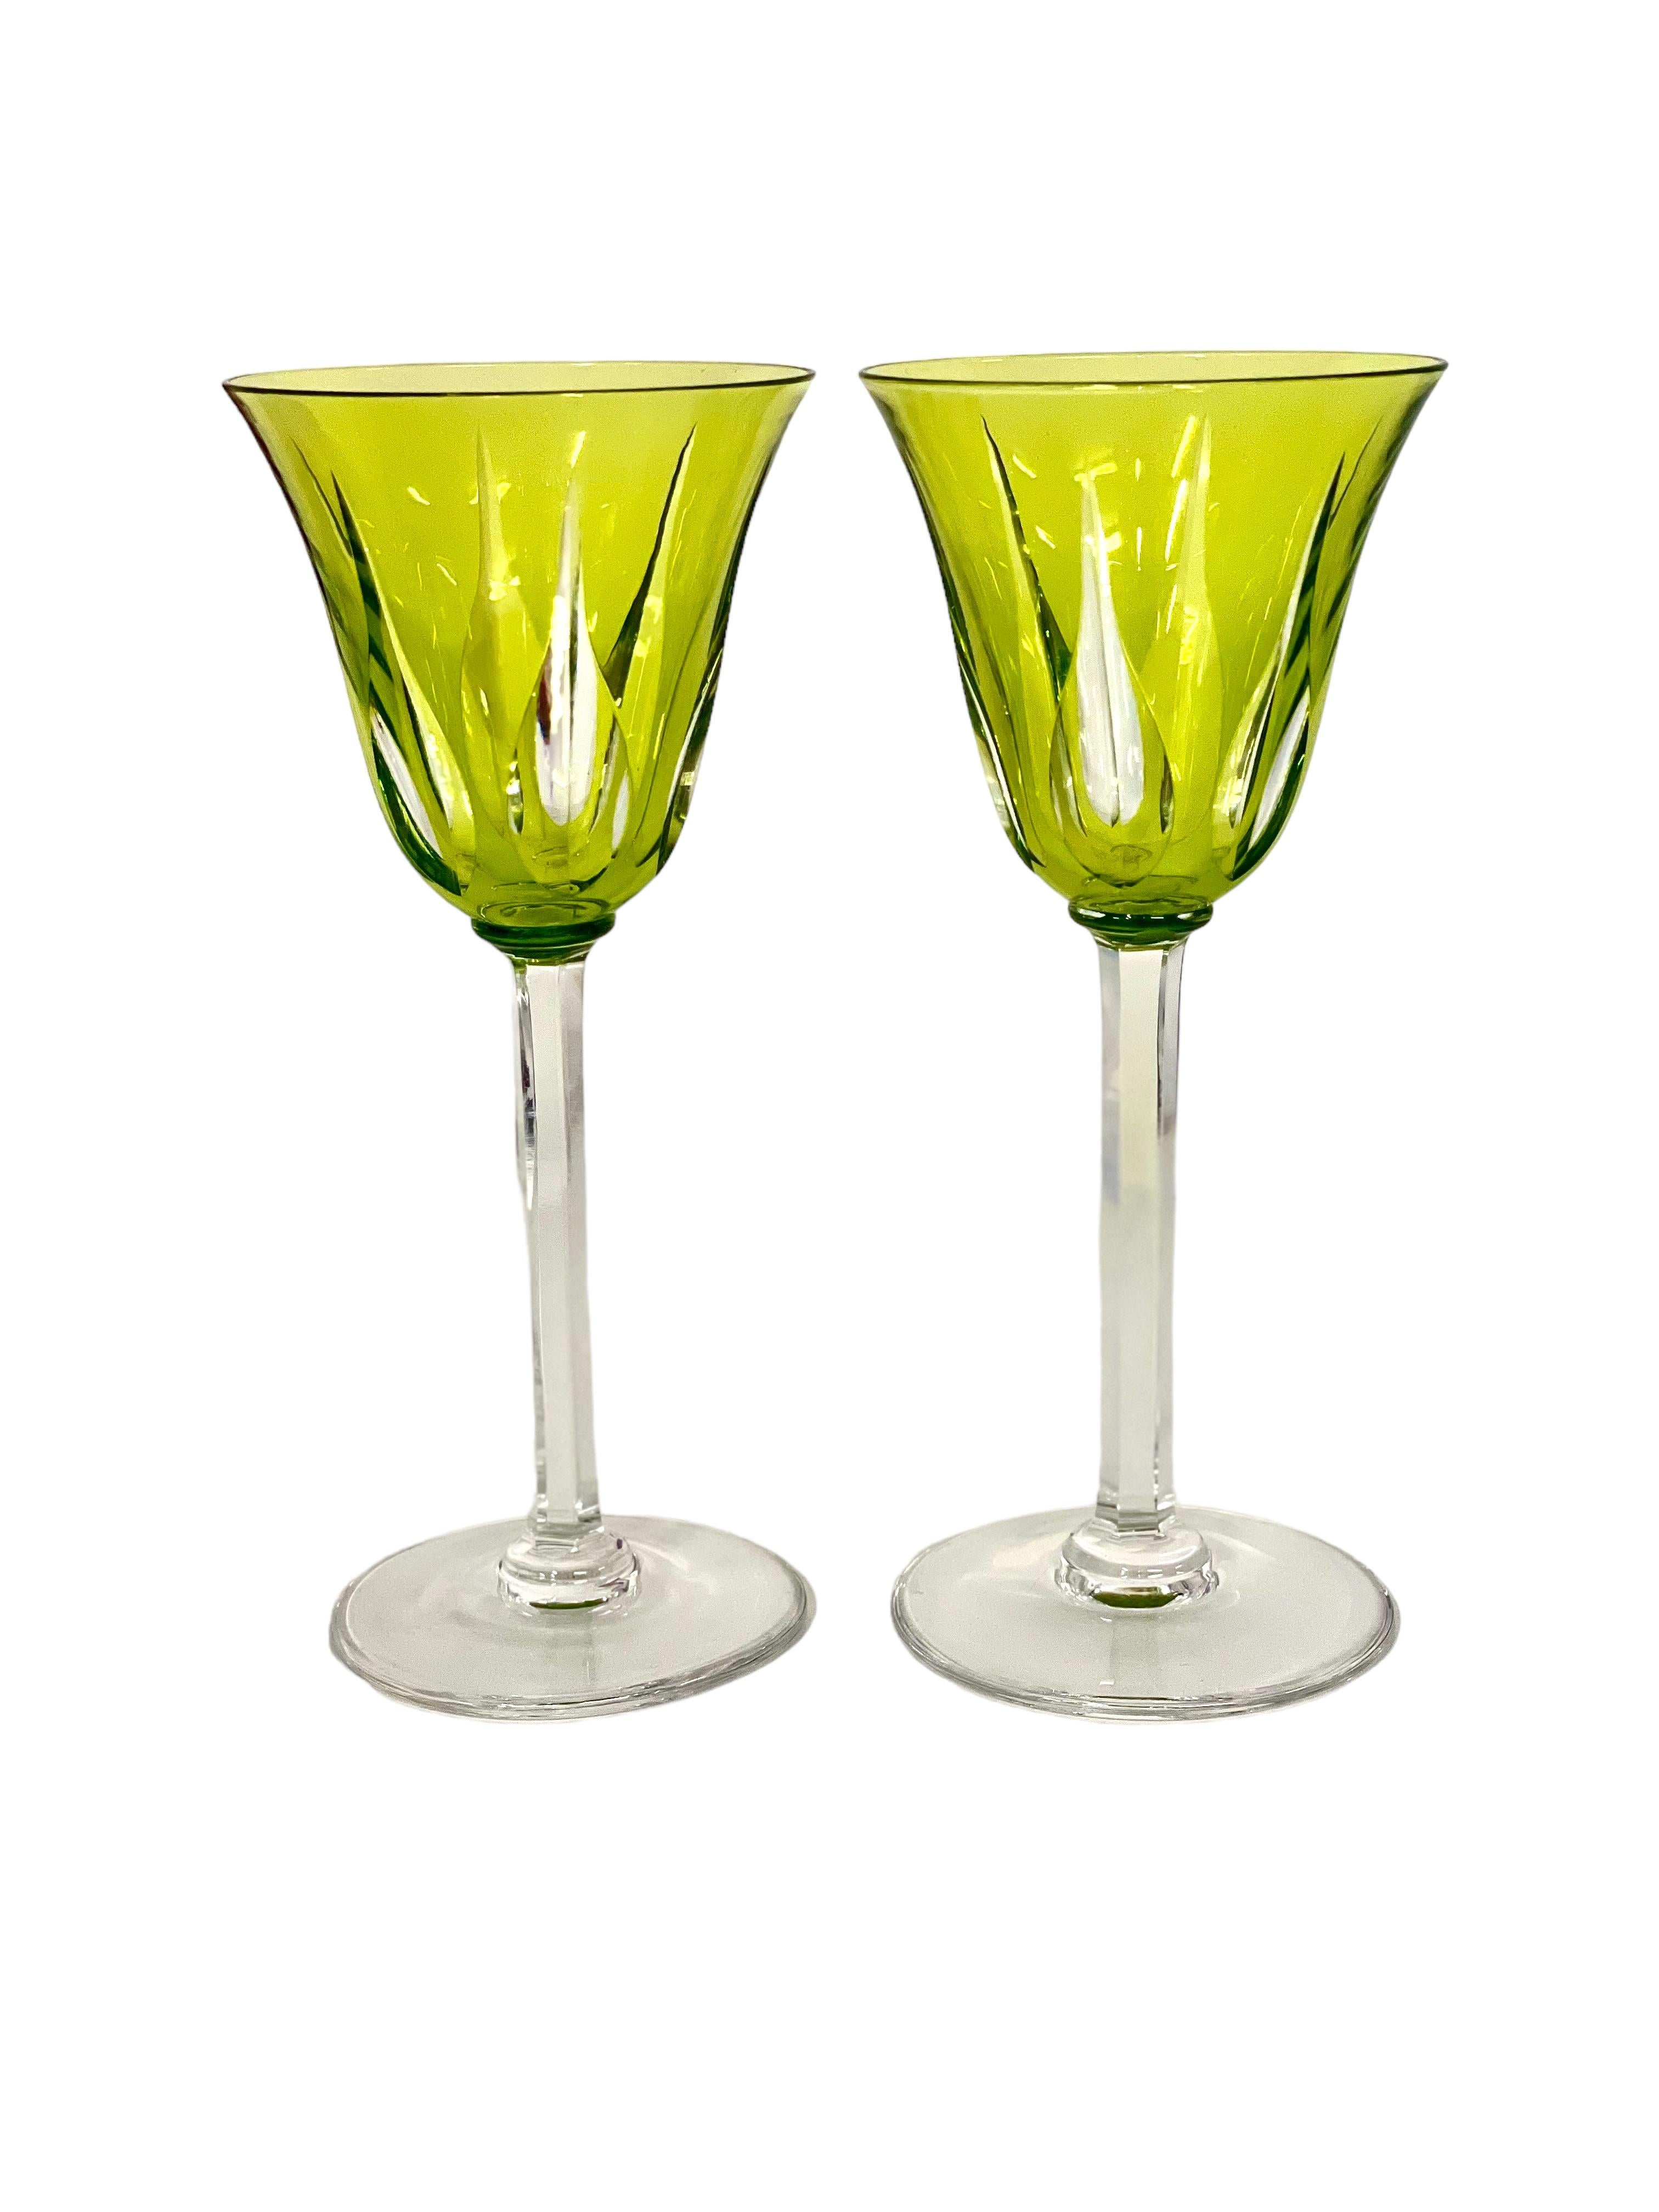 Saint Louis Set of Eleven Colourful Crystal Glasses  For Sale 2